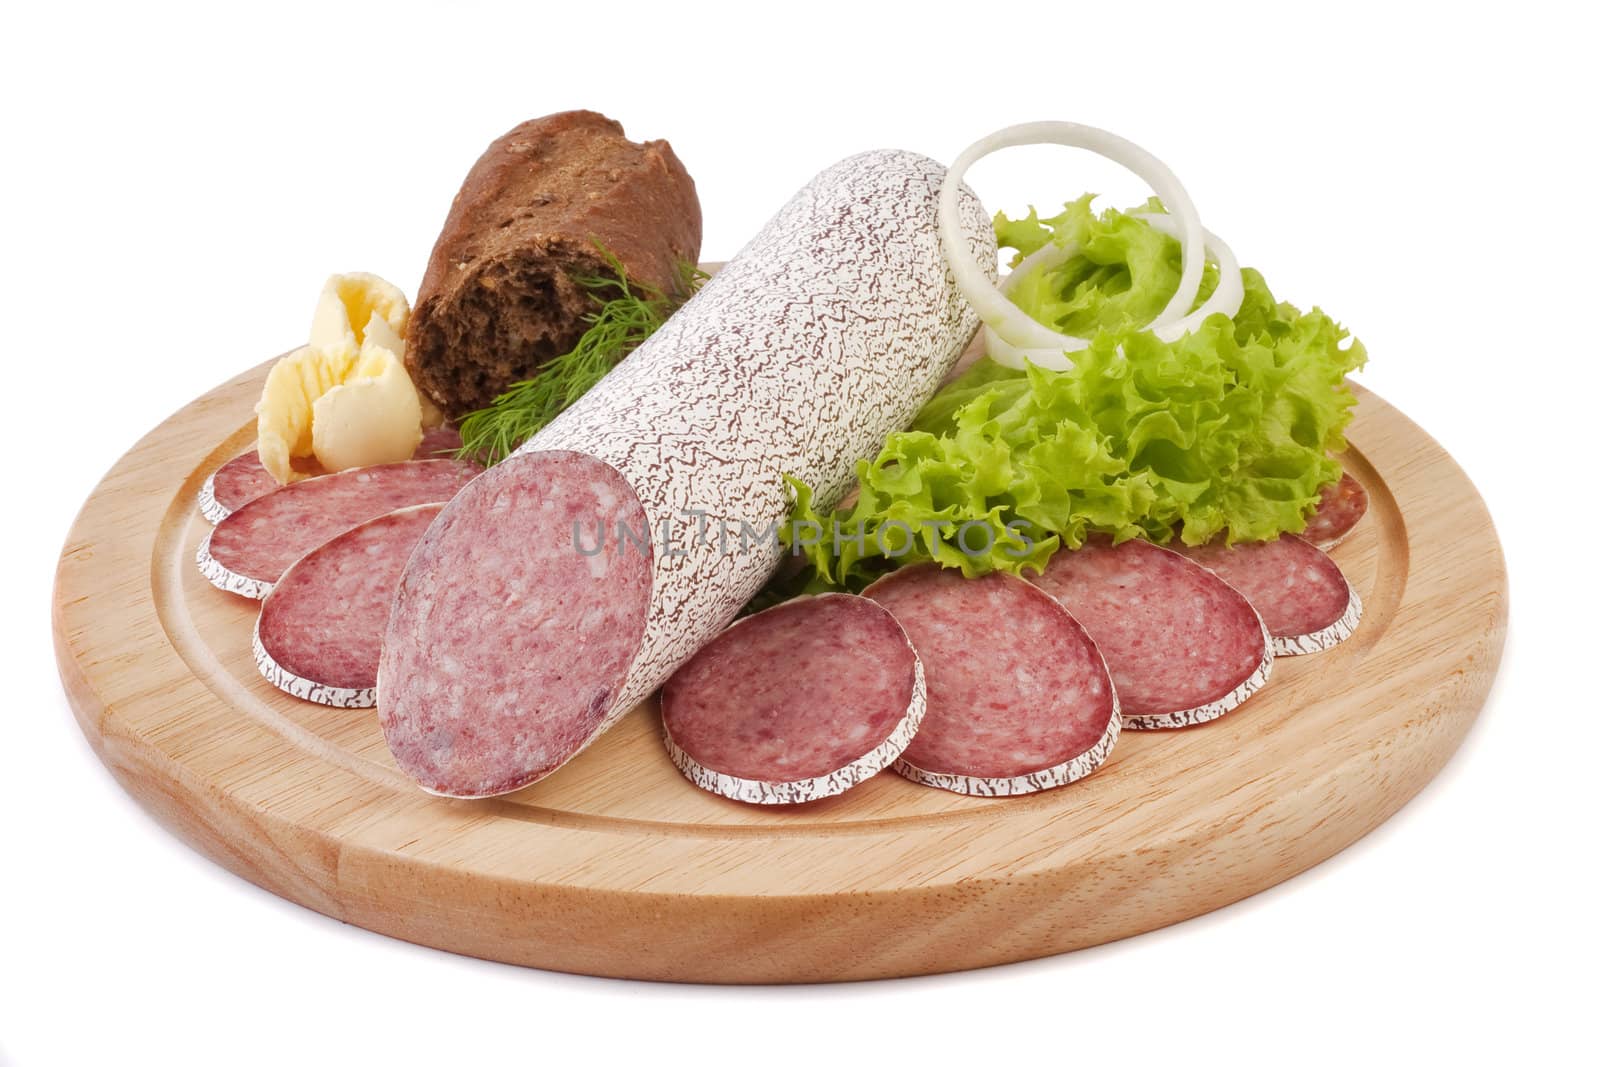 Sliced sausage with rye bread, butter and vegetables on a wooden plate isolated